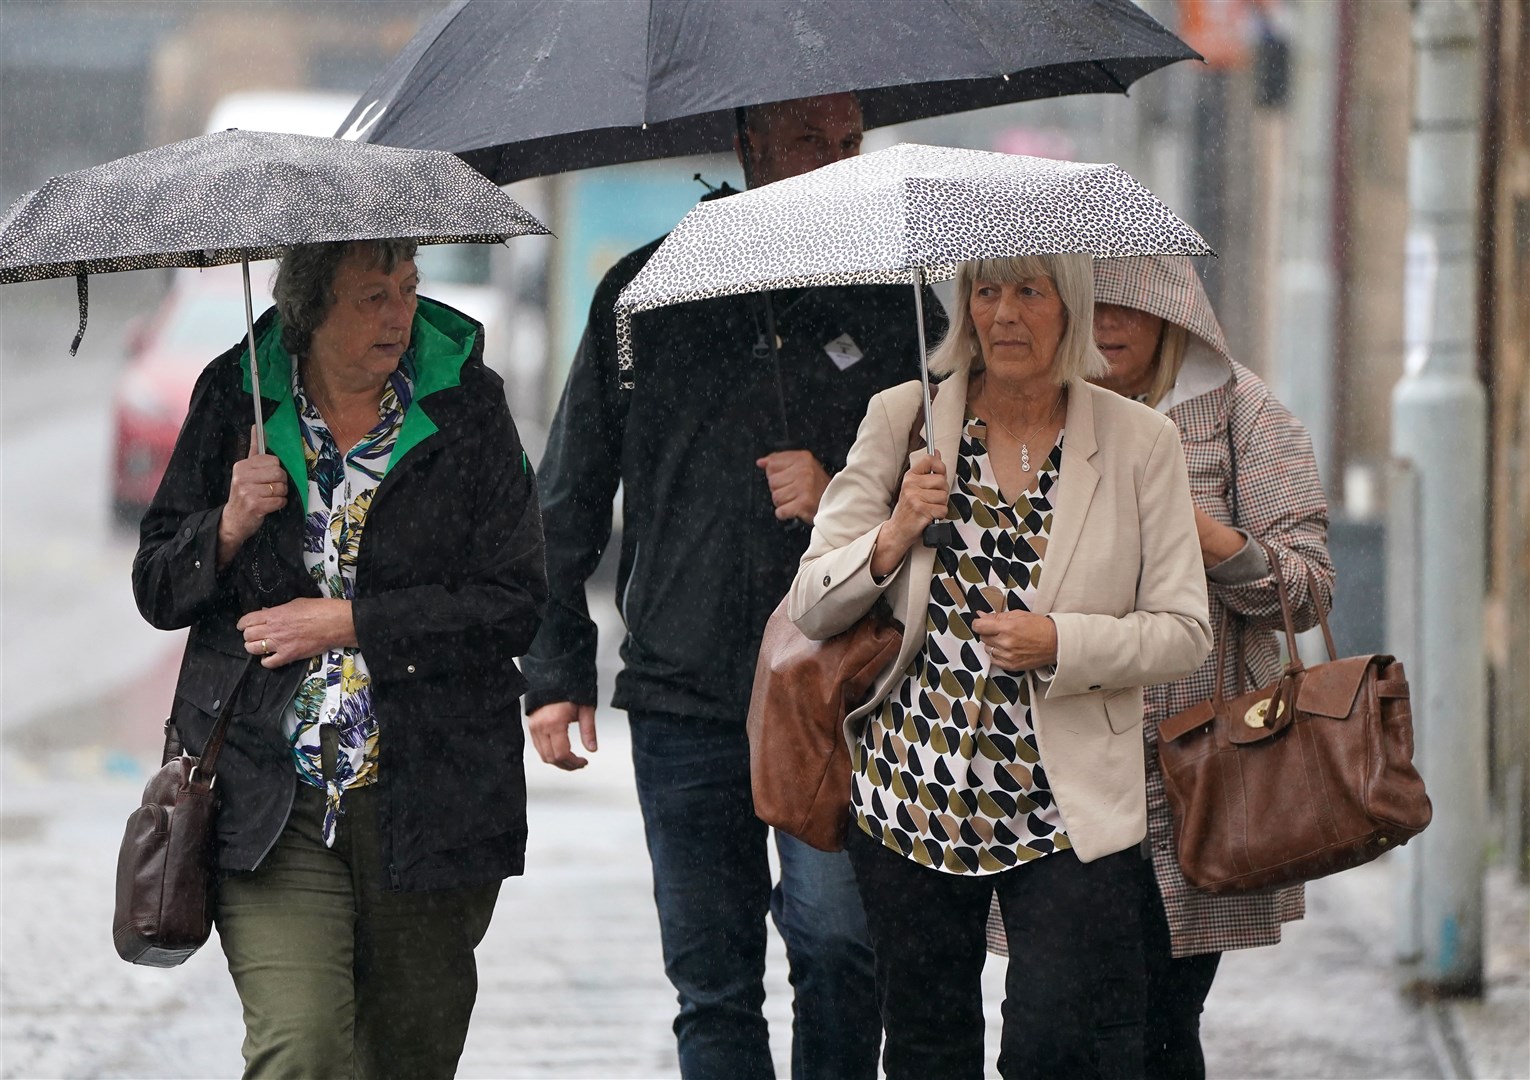 Jane Midgley, right, the mother of victim Simon Midgley arriving at Paisley Sheriff Court for the Fatal Accident Inquiry (Andrew Milligan/PA)